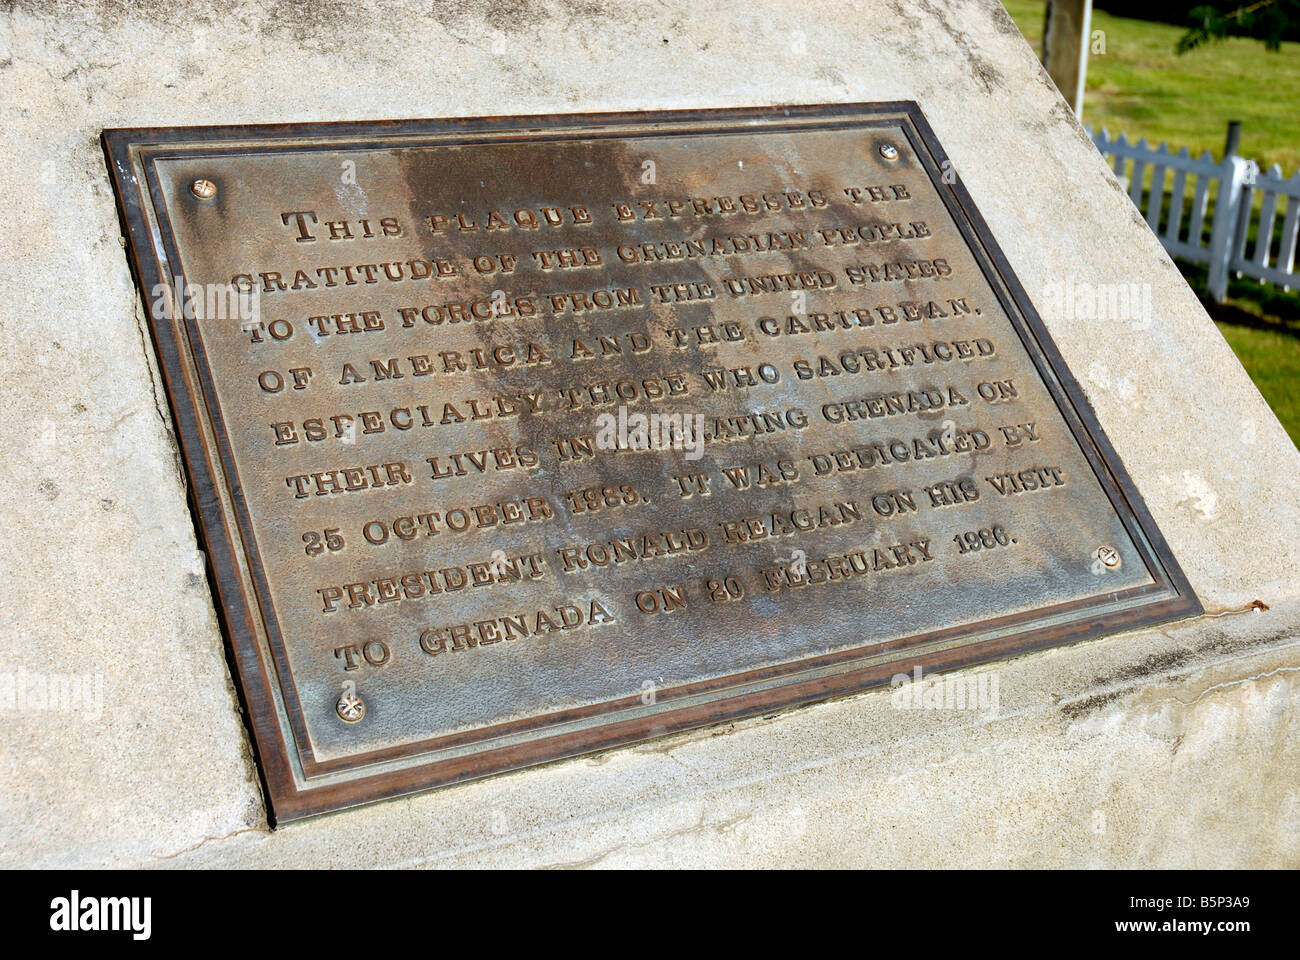 War Memorial to the Americans killed during the invasion in 1983 Grenada in the 'West Indies' Stock Photo